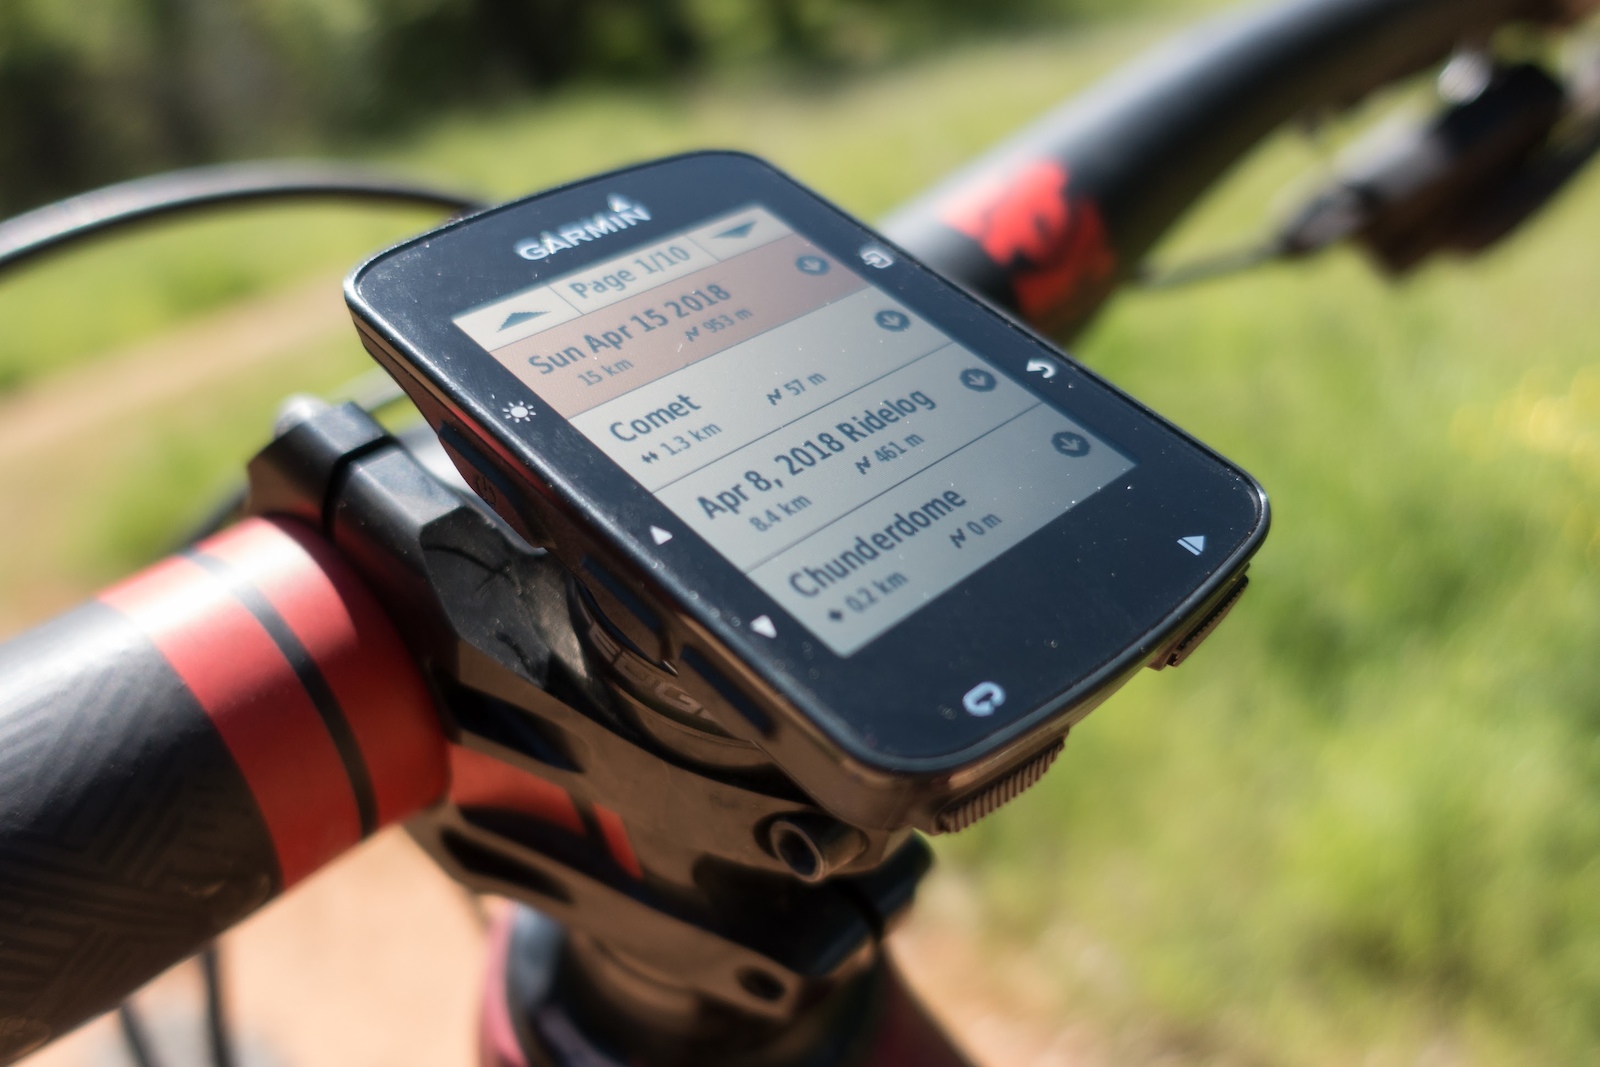 Trailforks now available on the Garmin Edge devices ( 520,820,100,1030) including the new 520+